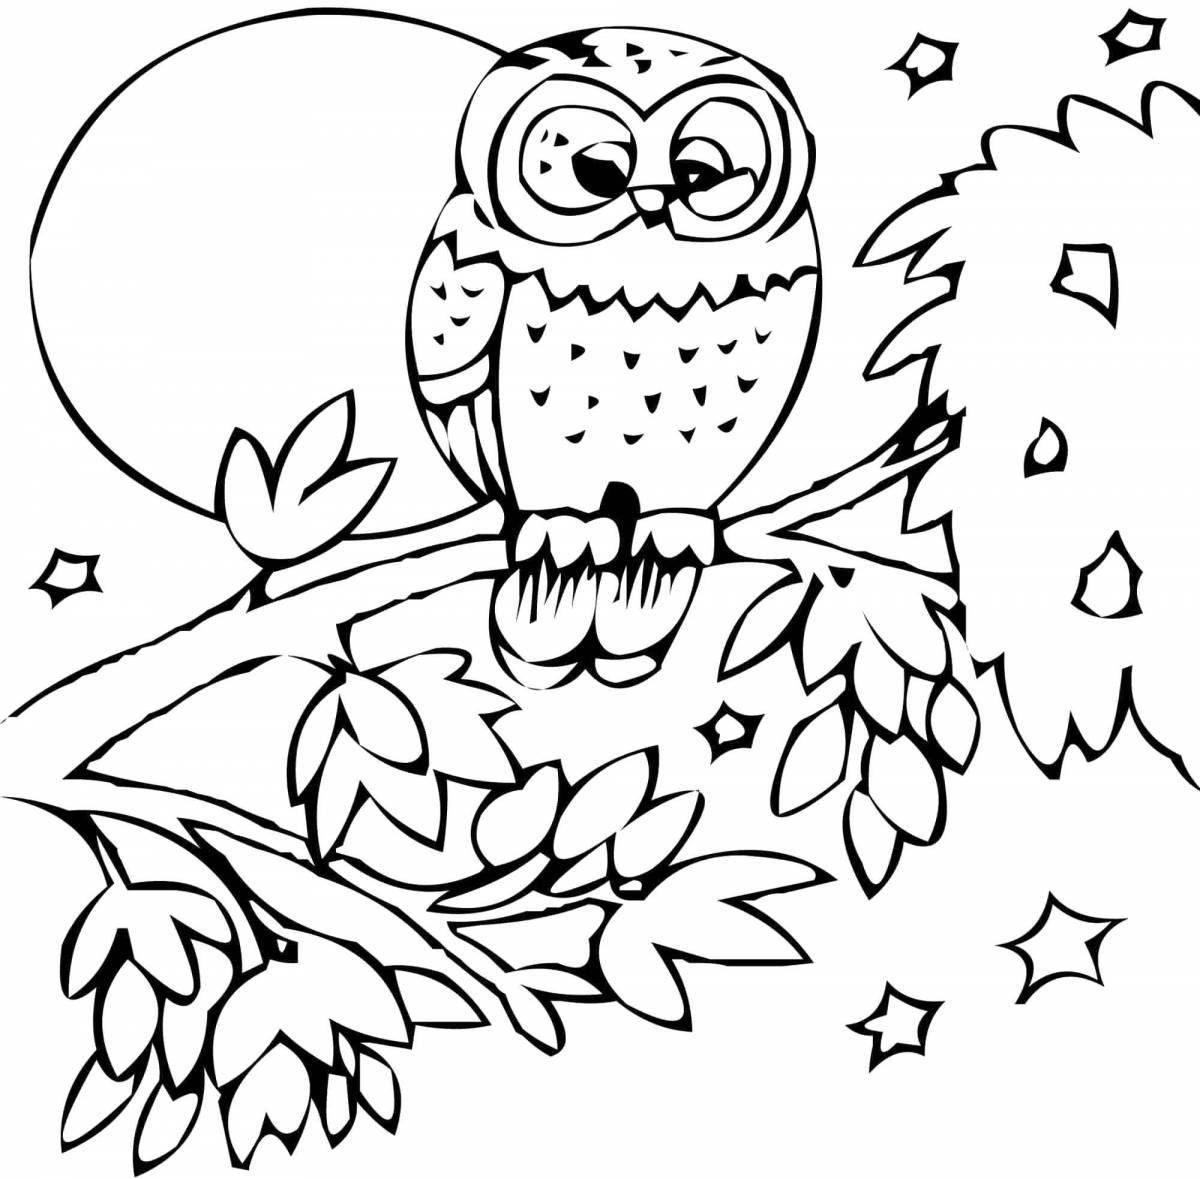 Funny owl coloring for children 3-4 years old